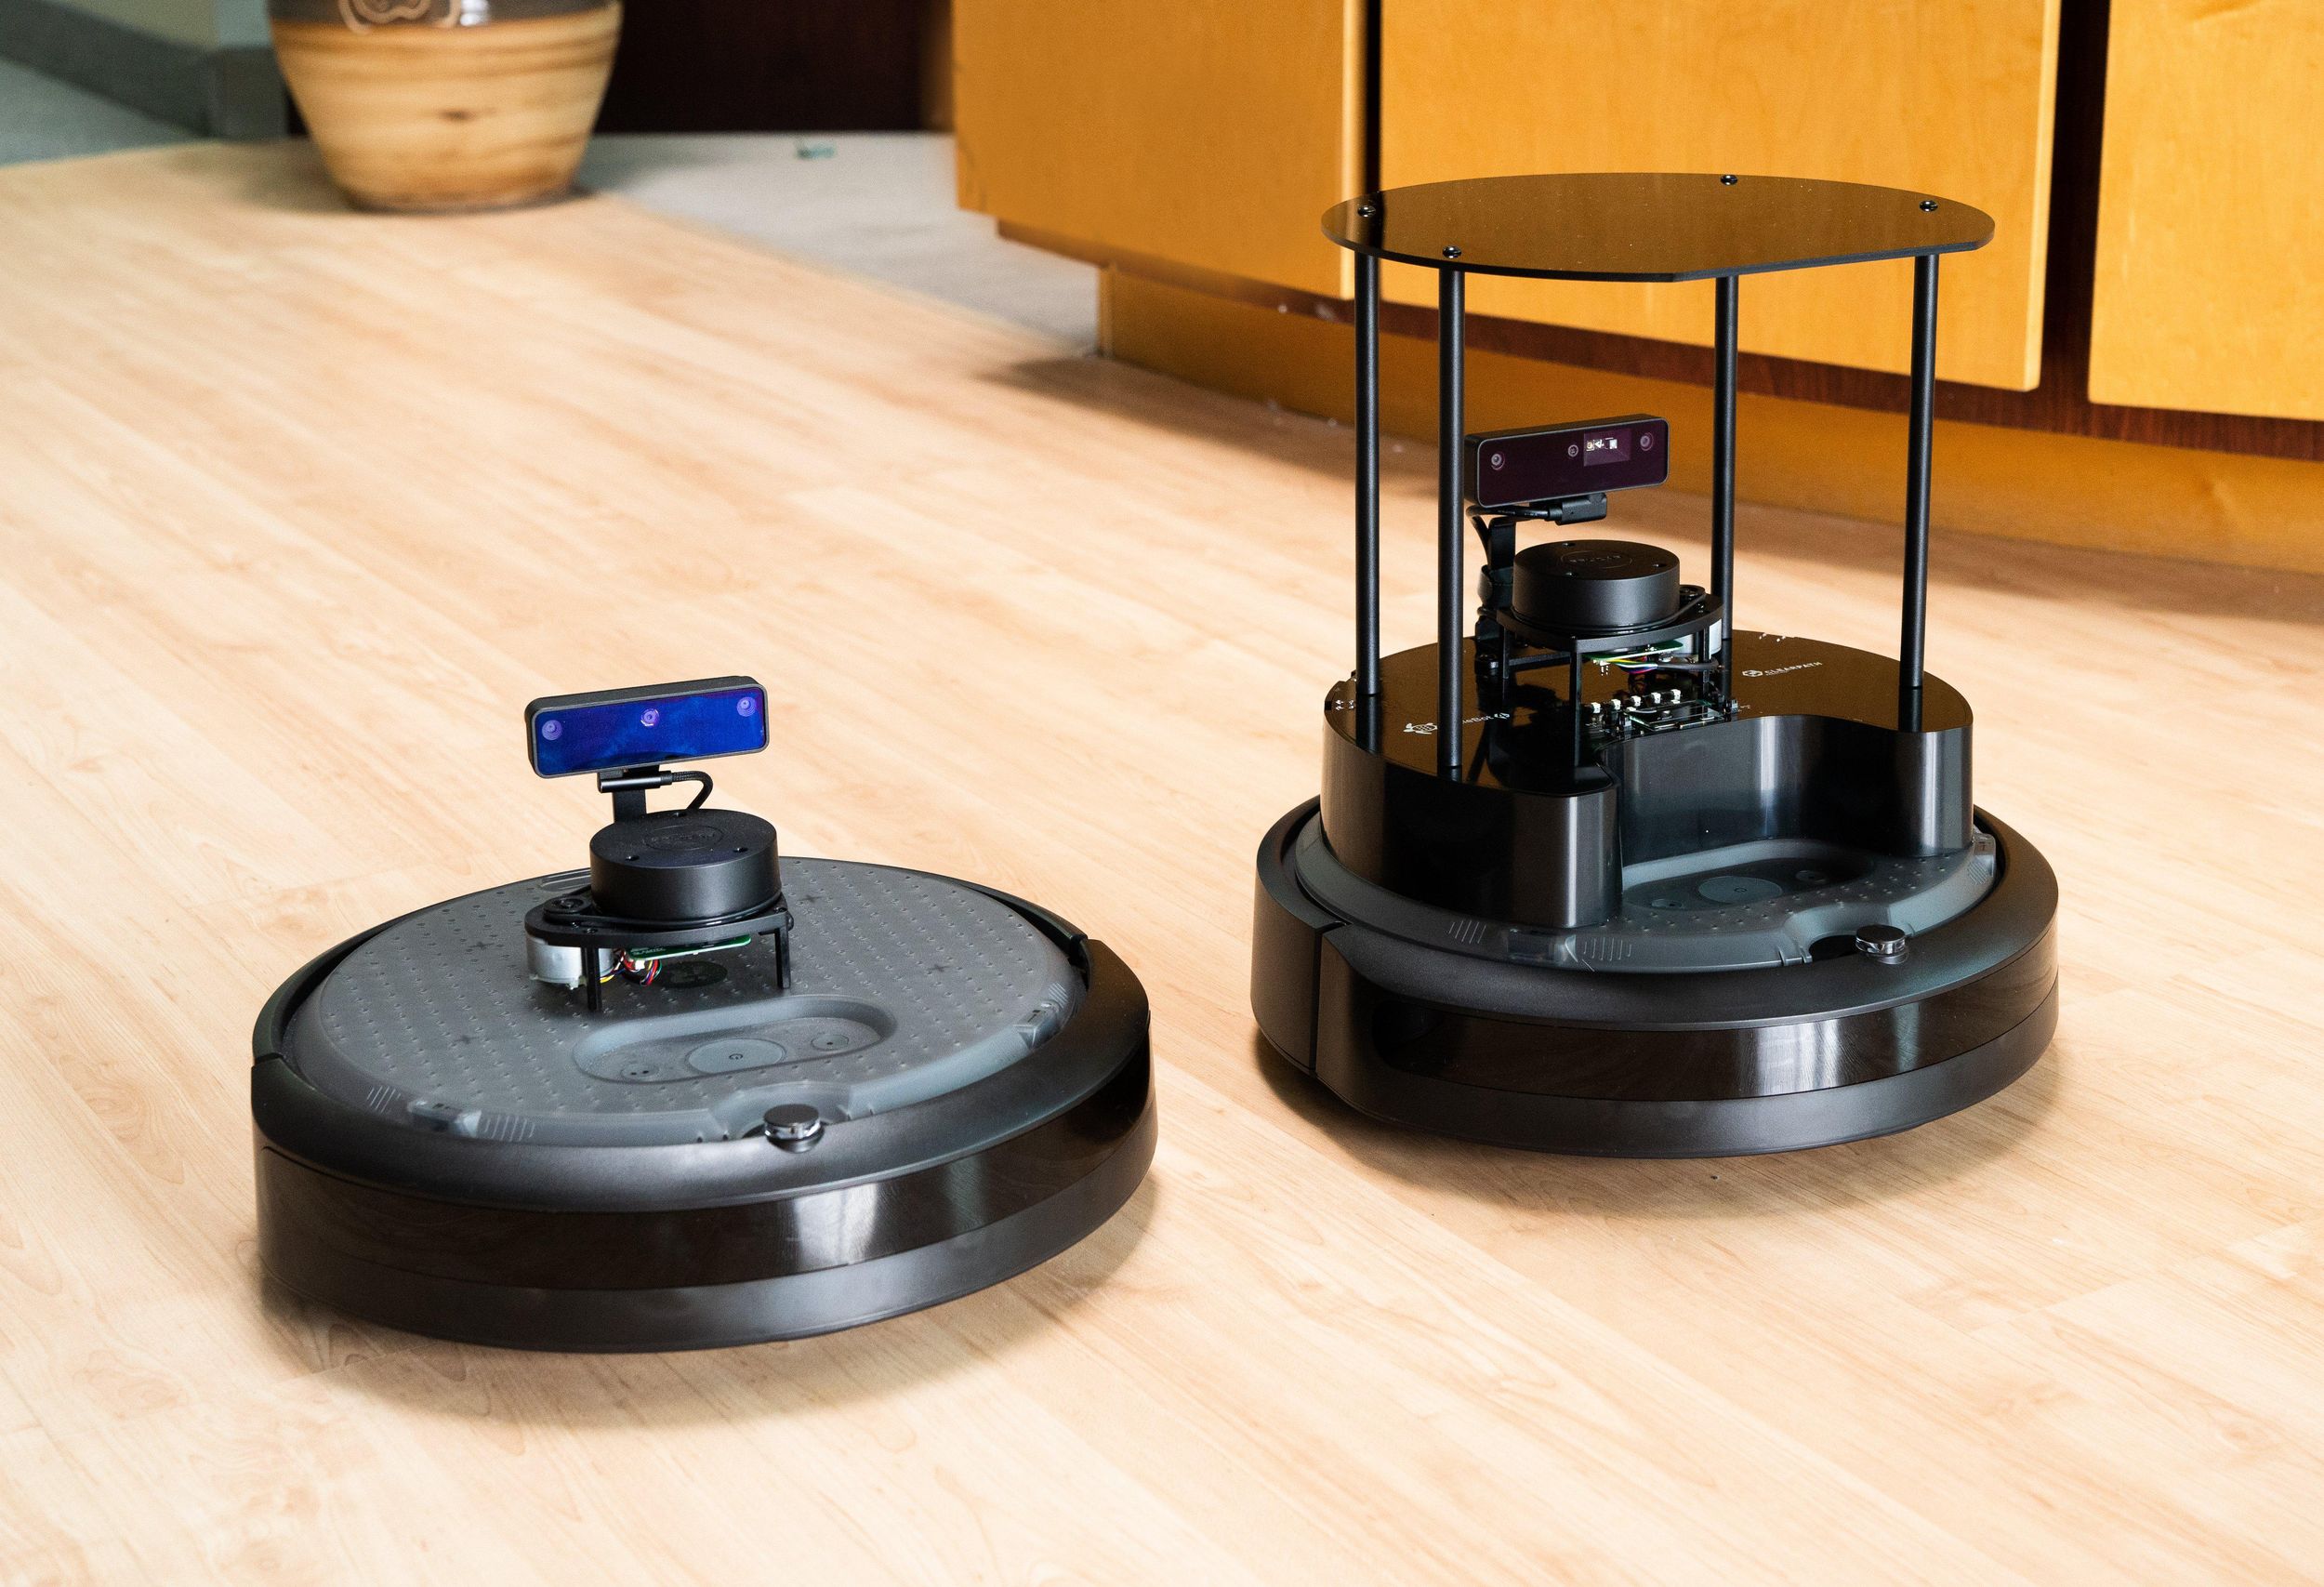 Two Roomba-like robots with sensors on top, one of which is slightly larger